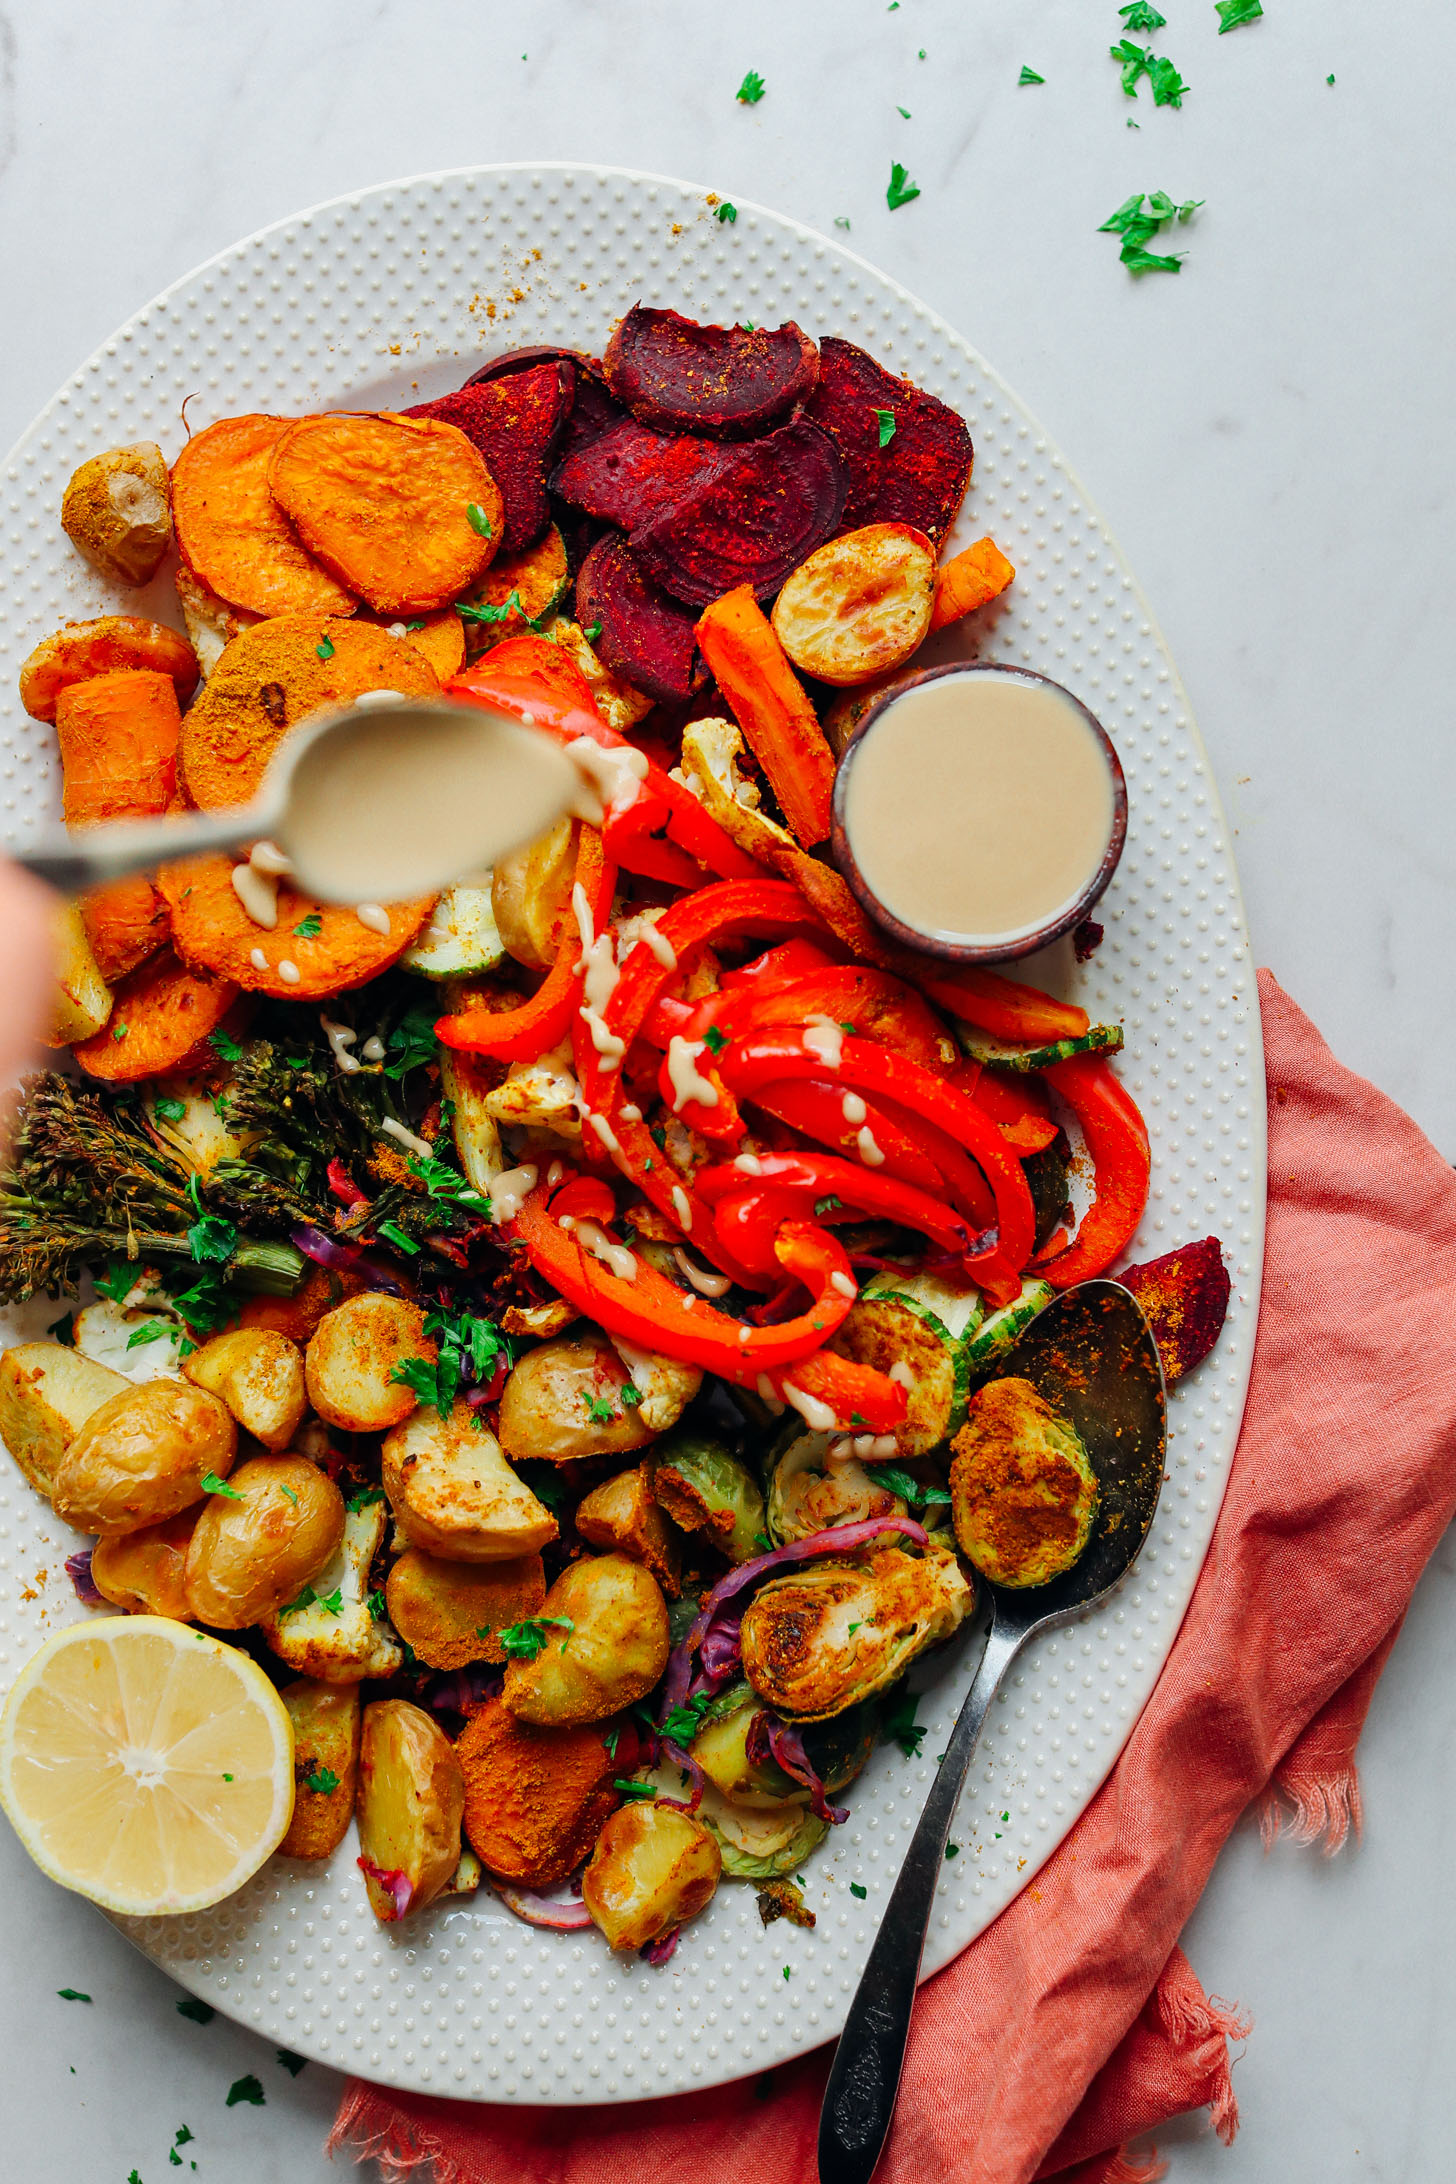 Drizzling tahini over a ceramic platter filled with Oil-Free Roasted Vegetables